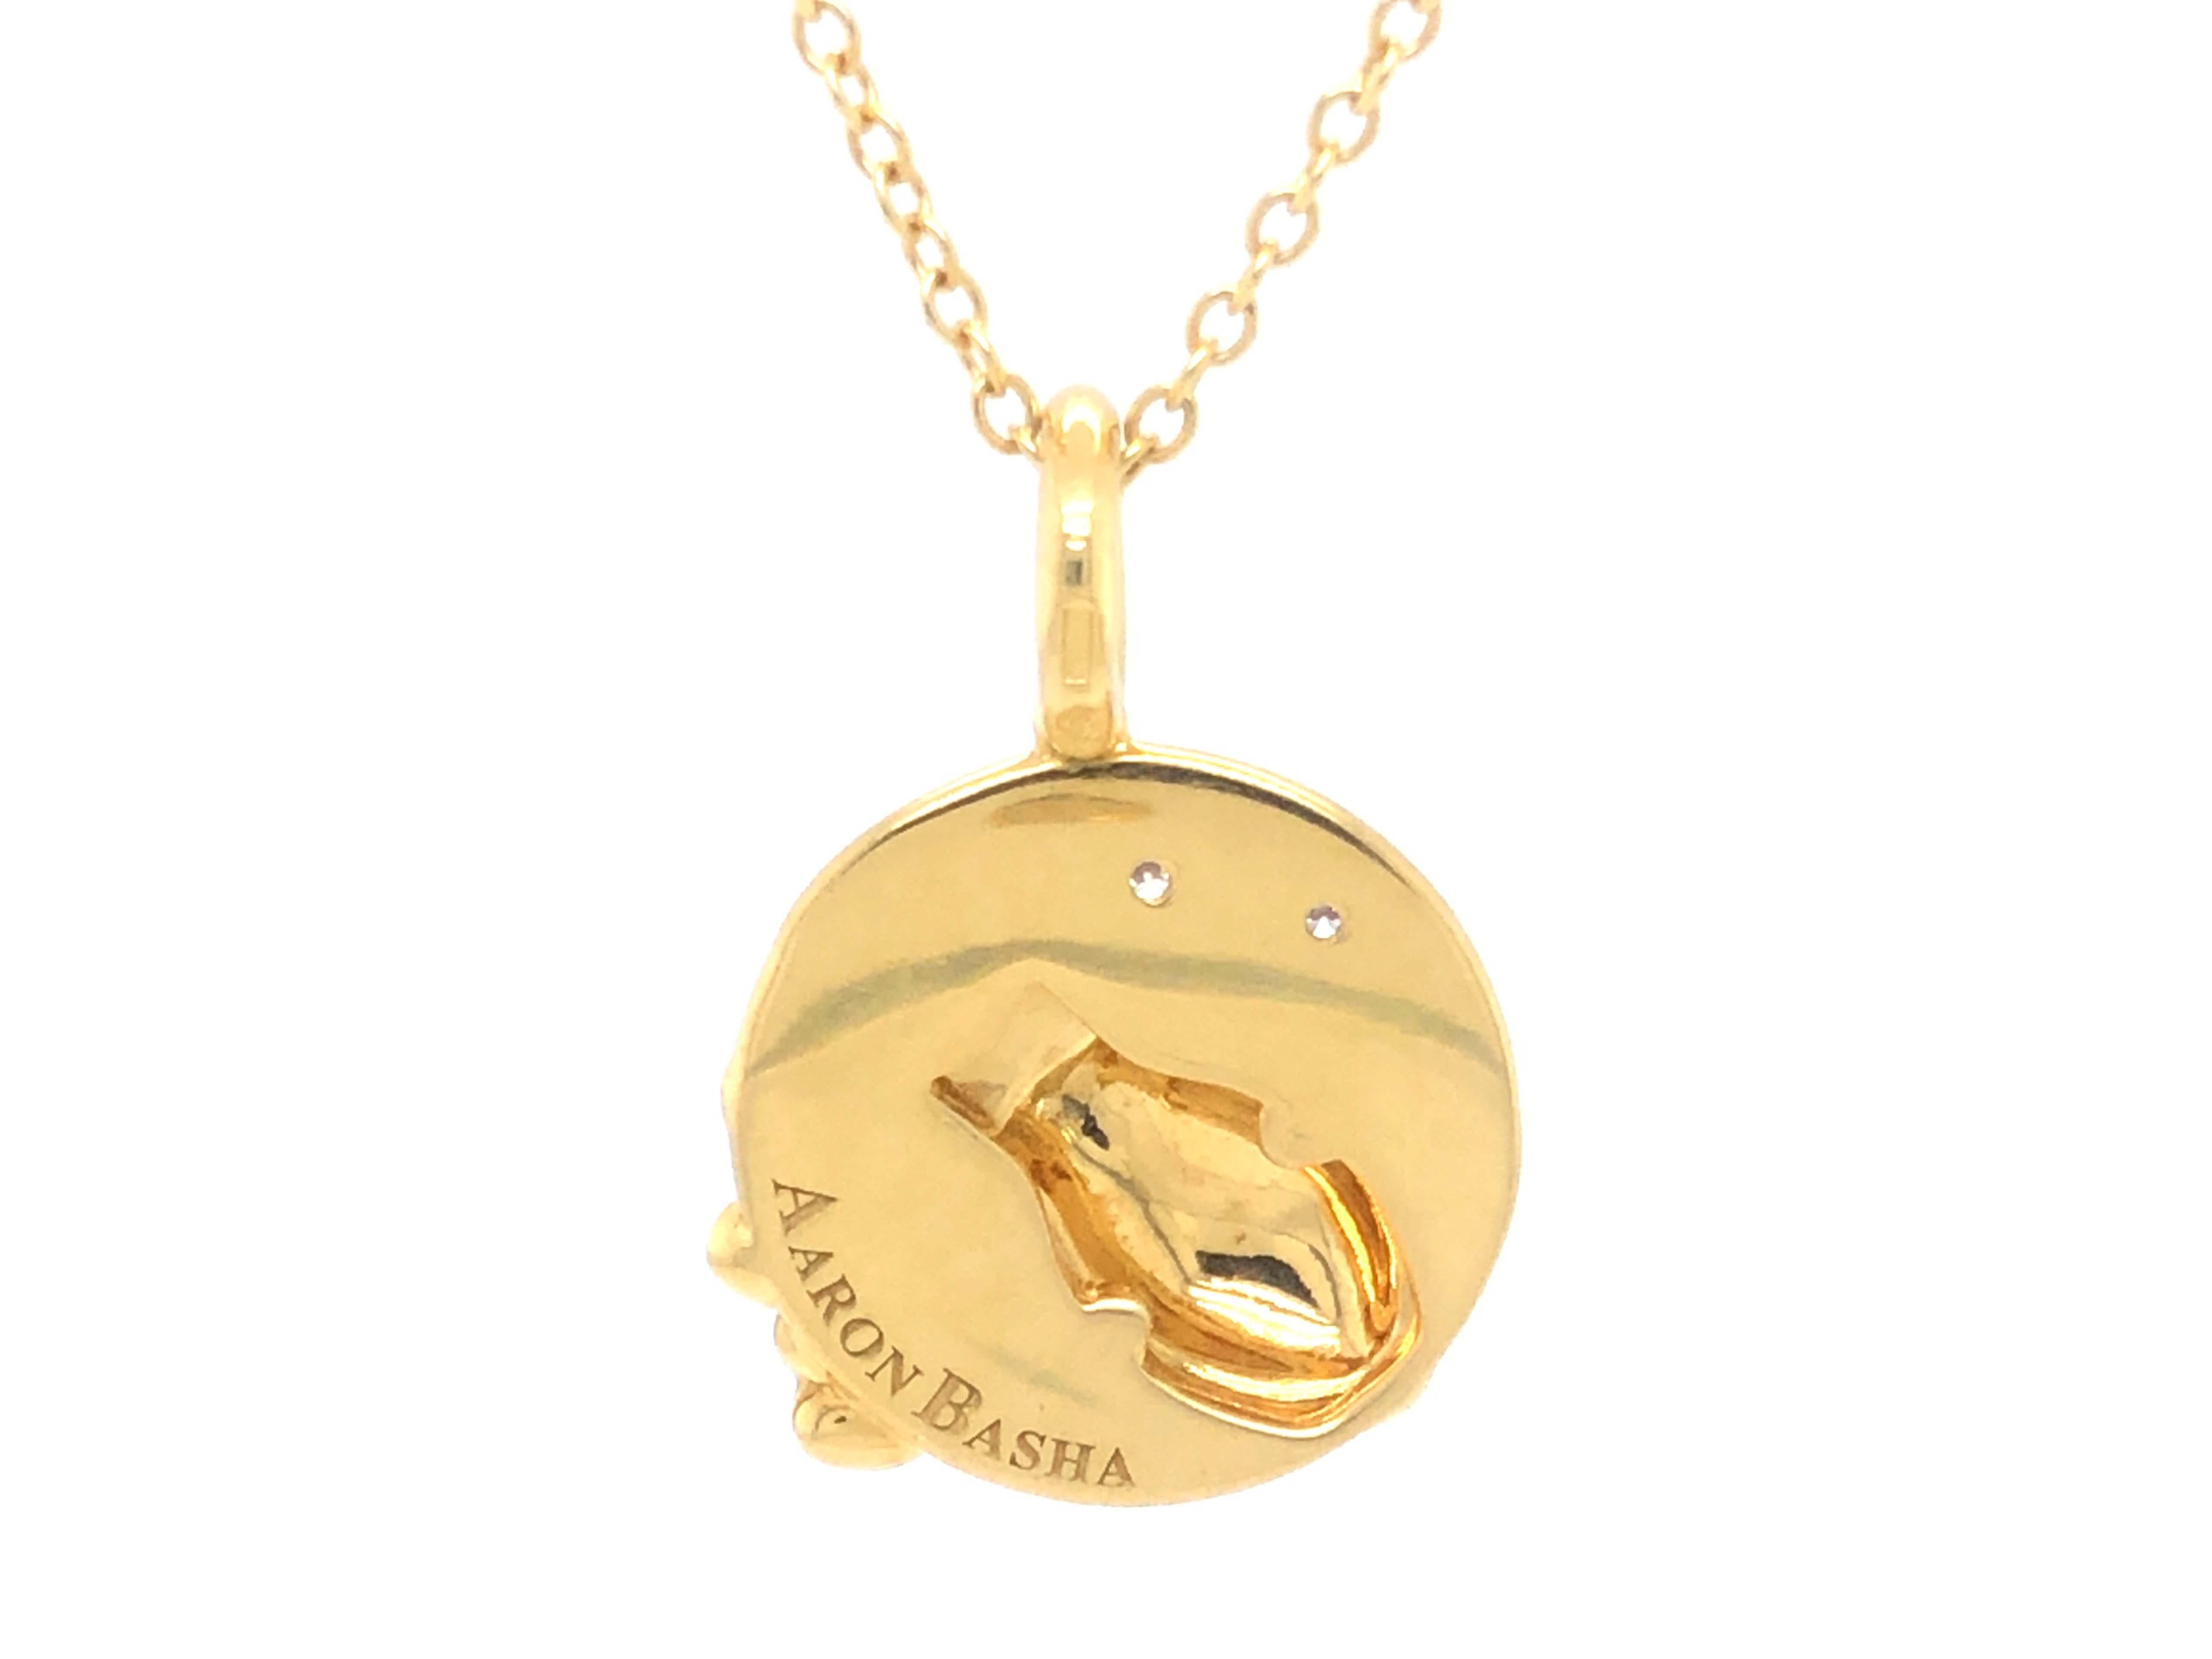 Aaron Basha Aquarius Enamel Diamond Pendant and Chain in 18k Yellow Gold In Excellent Condition For Sale In Honolulu, HI